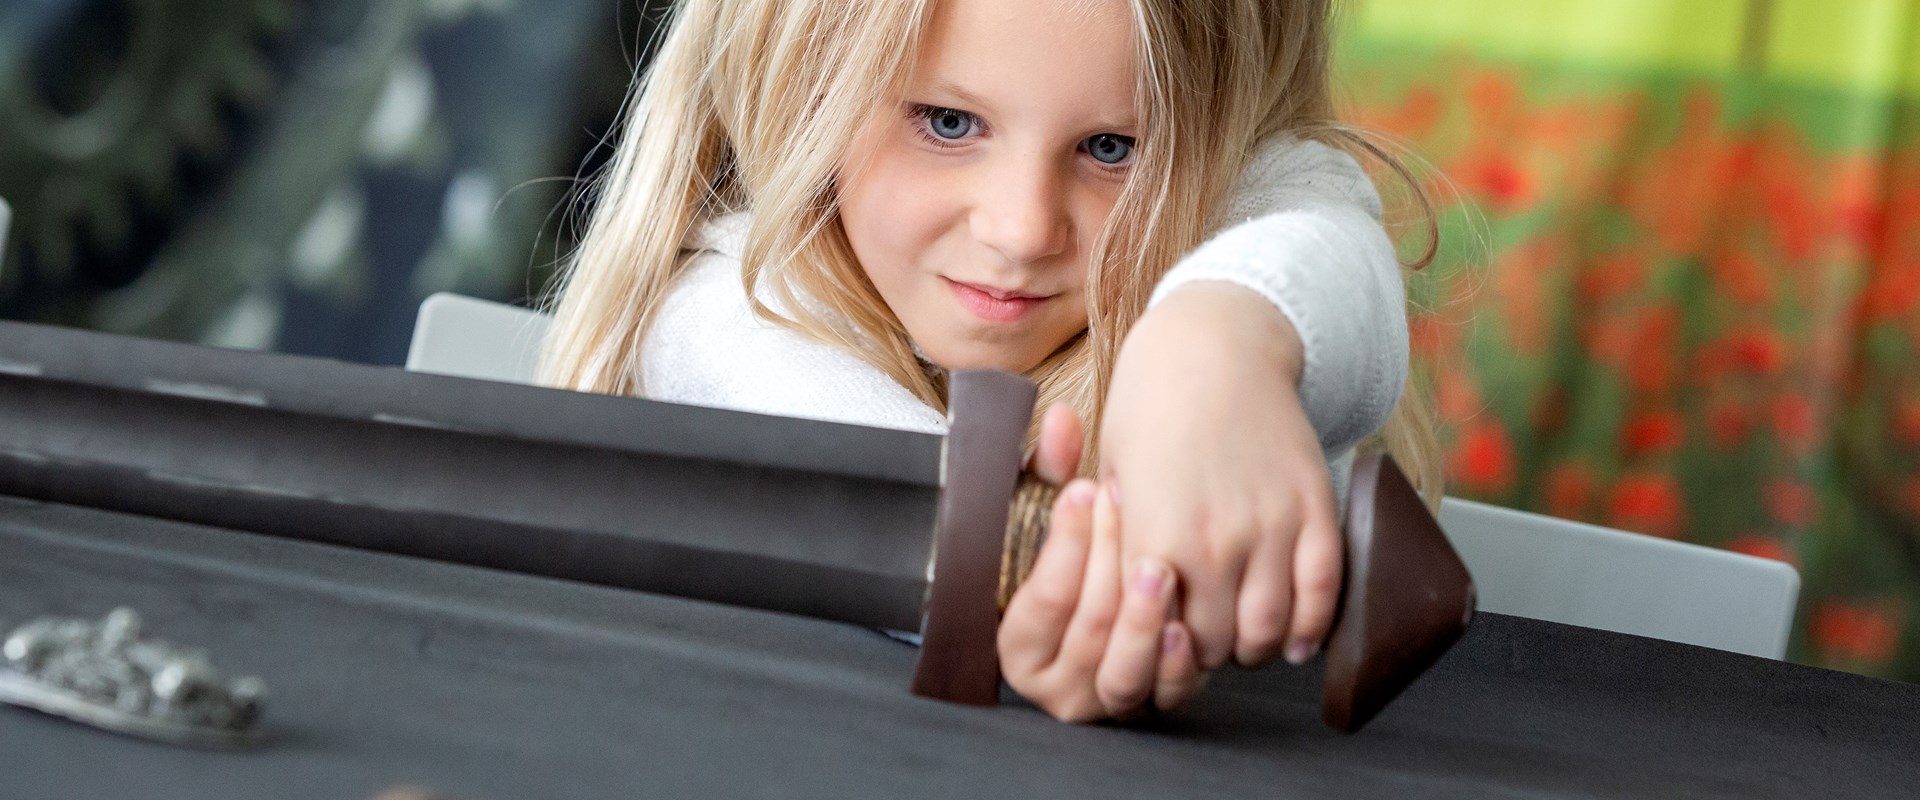 A young child holds the handle of a metal sword as it lies across the table